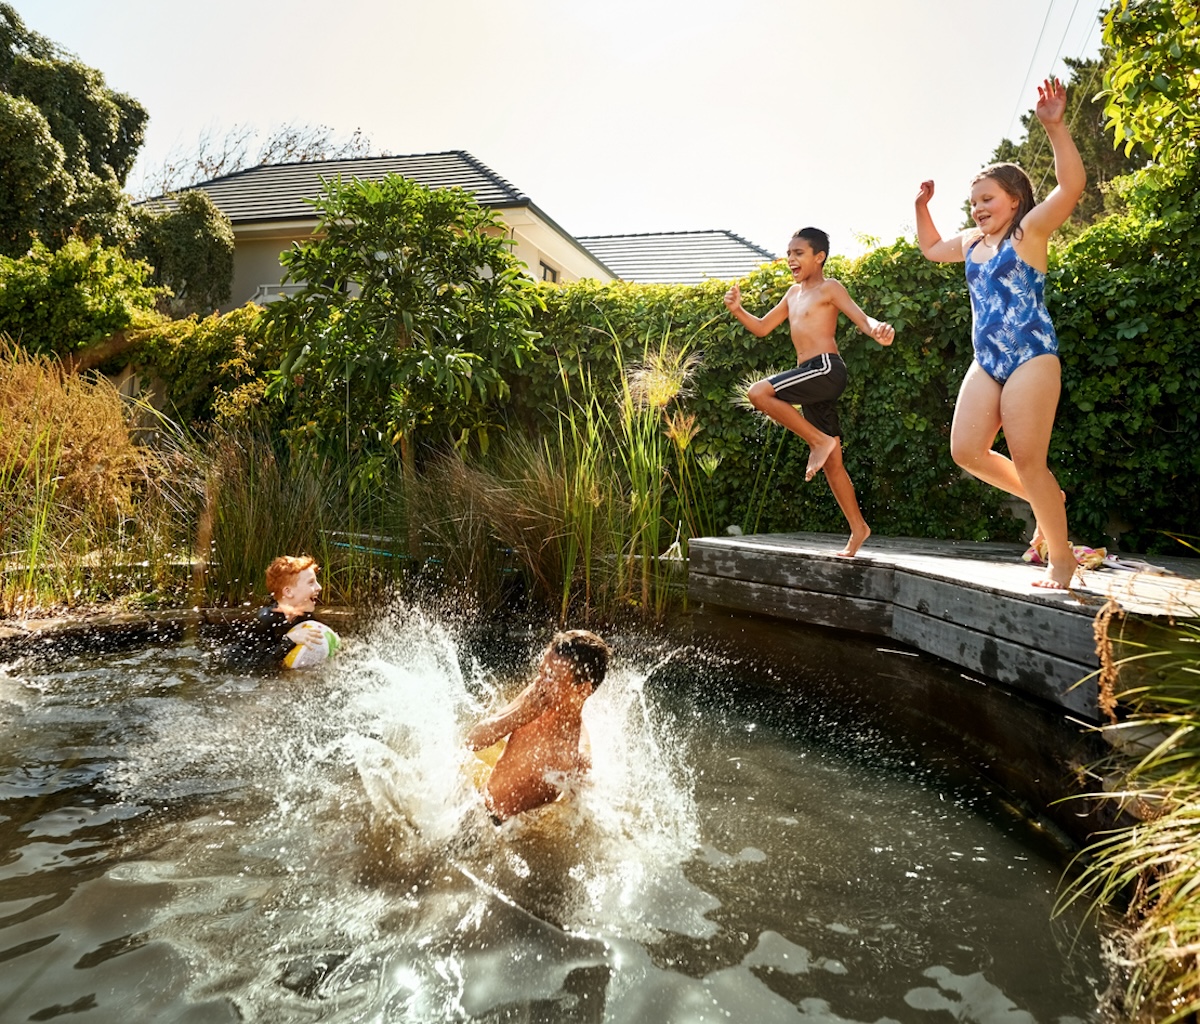 Children jumping into natural pool.